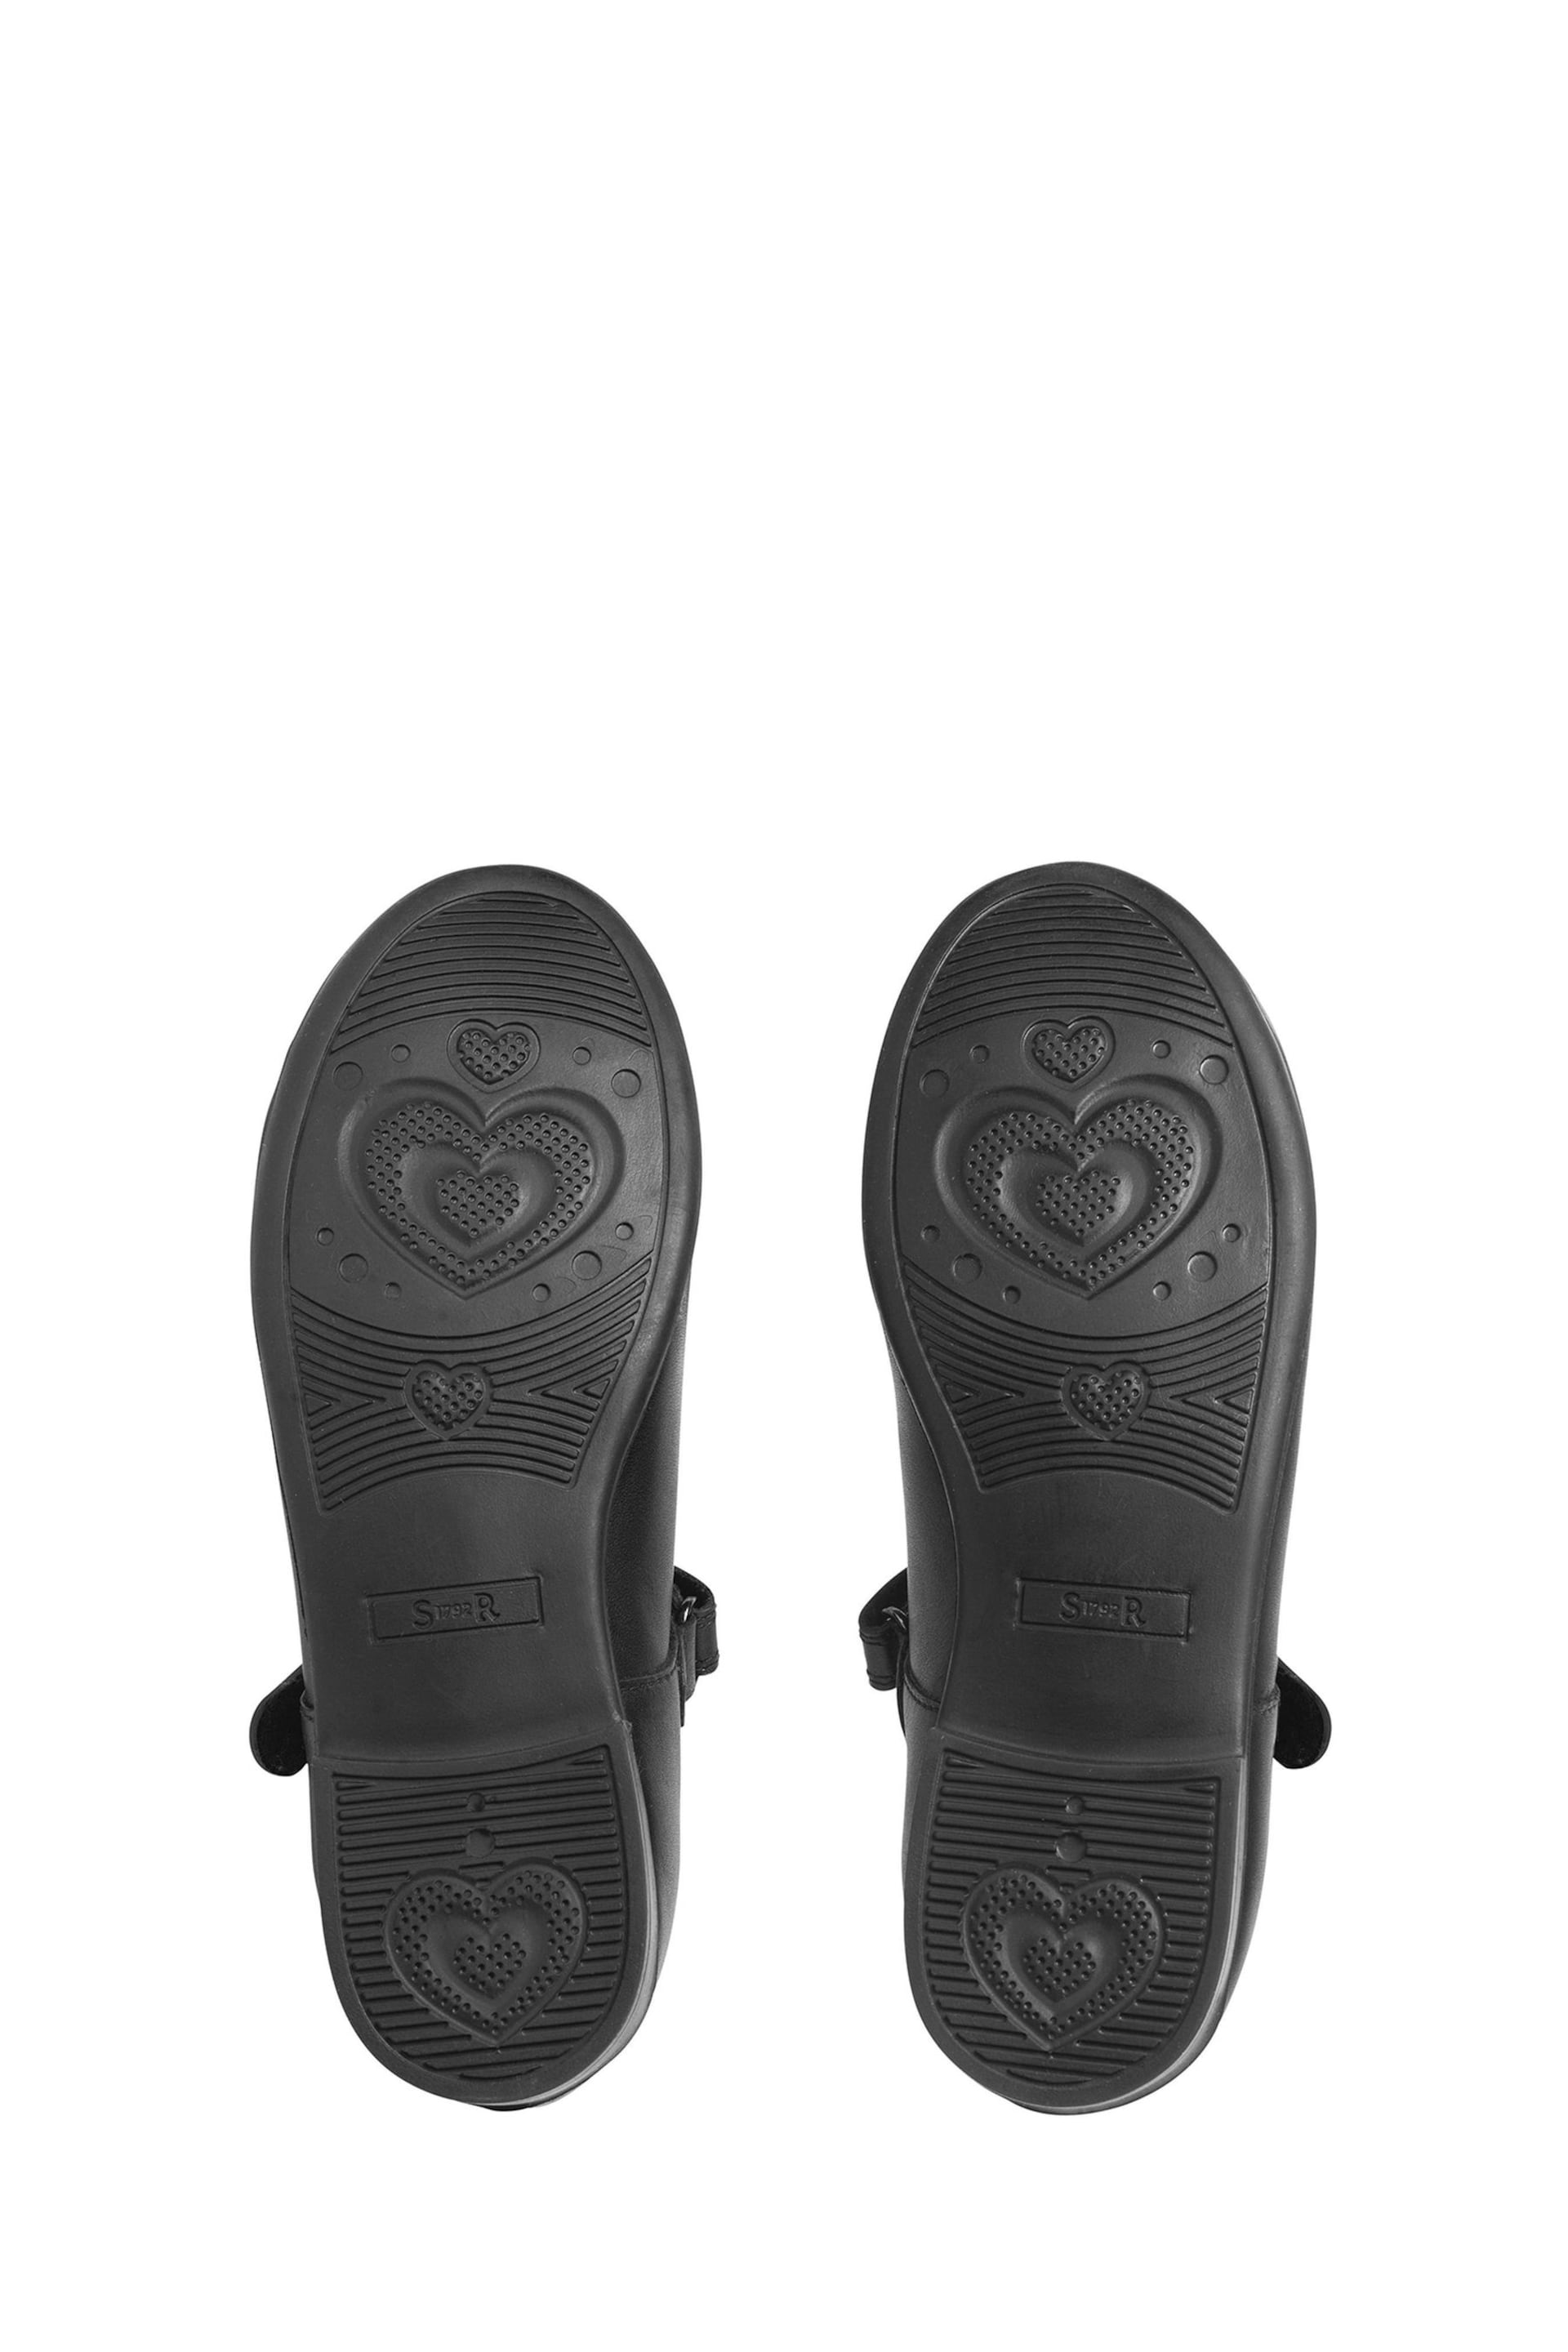 Start-Rite Stardust Black Leather Mary Jane School Shoes - Image 5 of 6